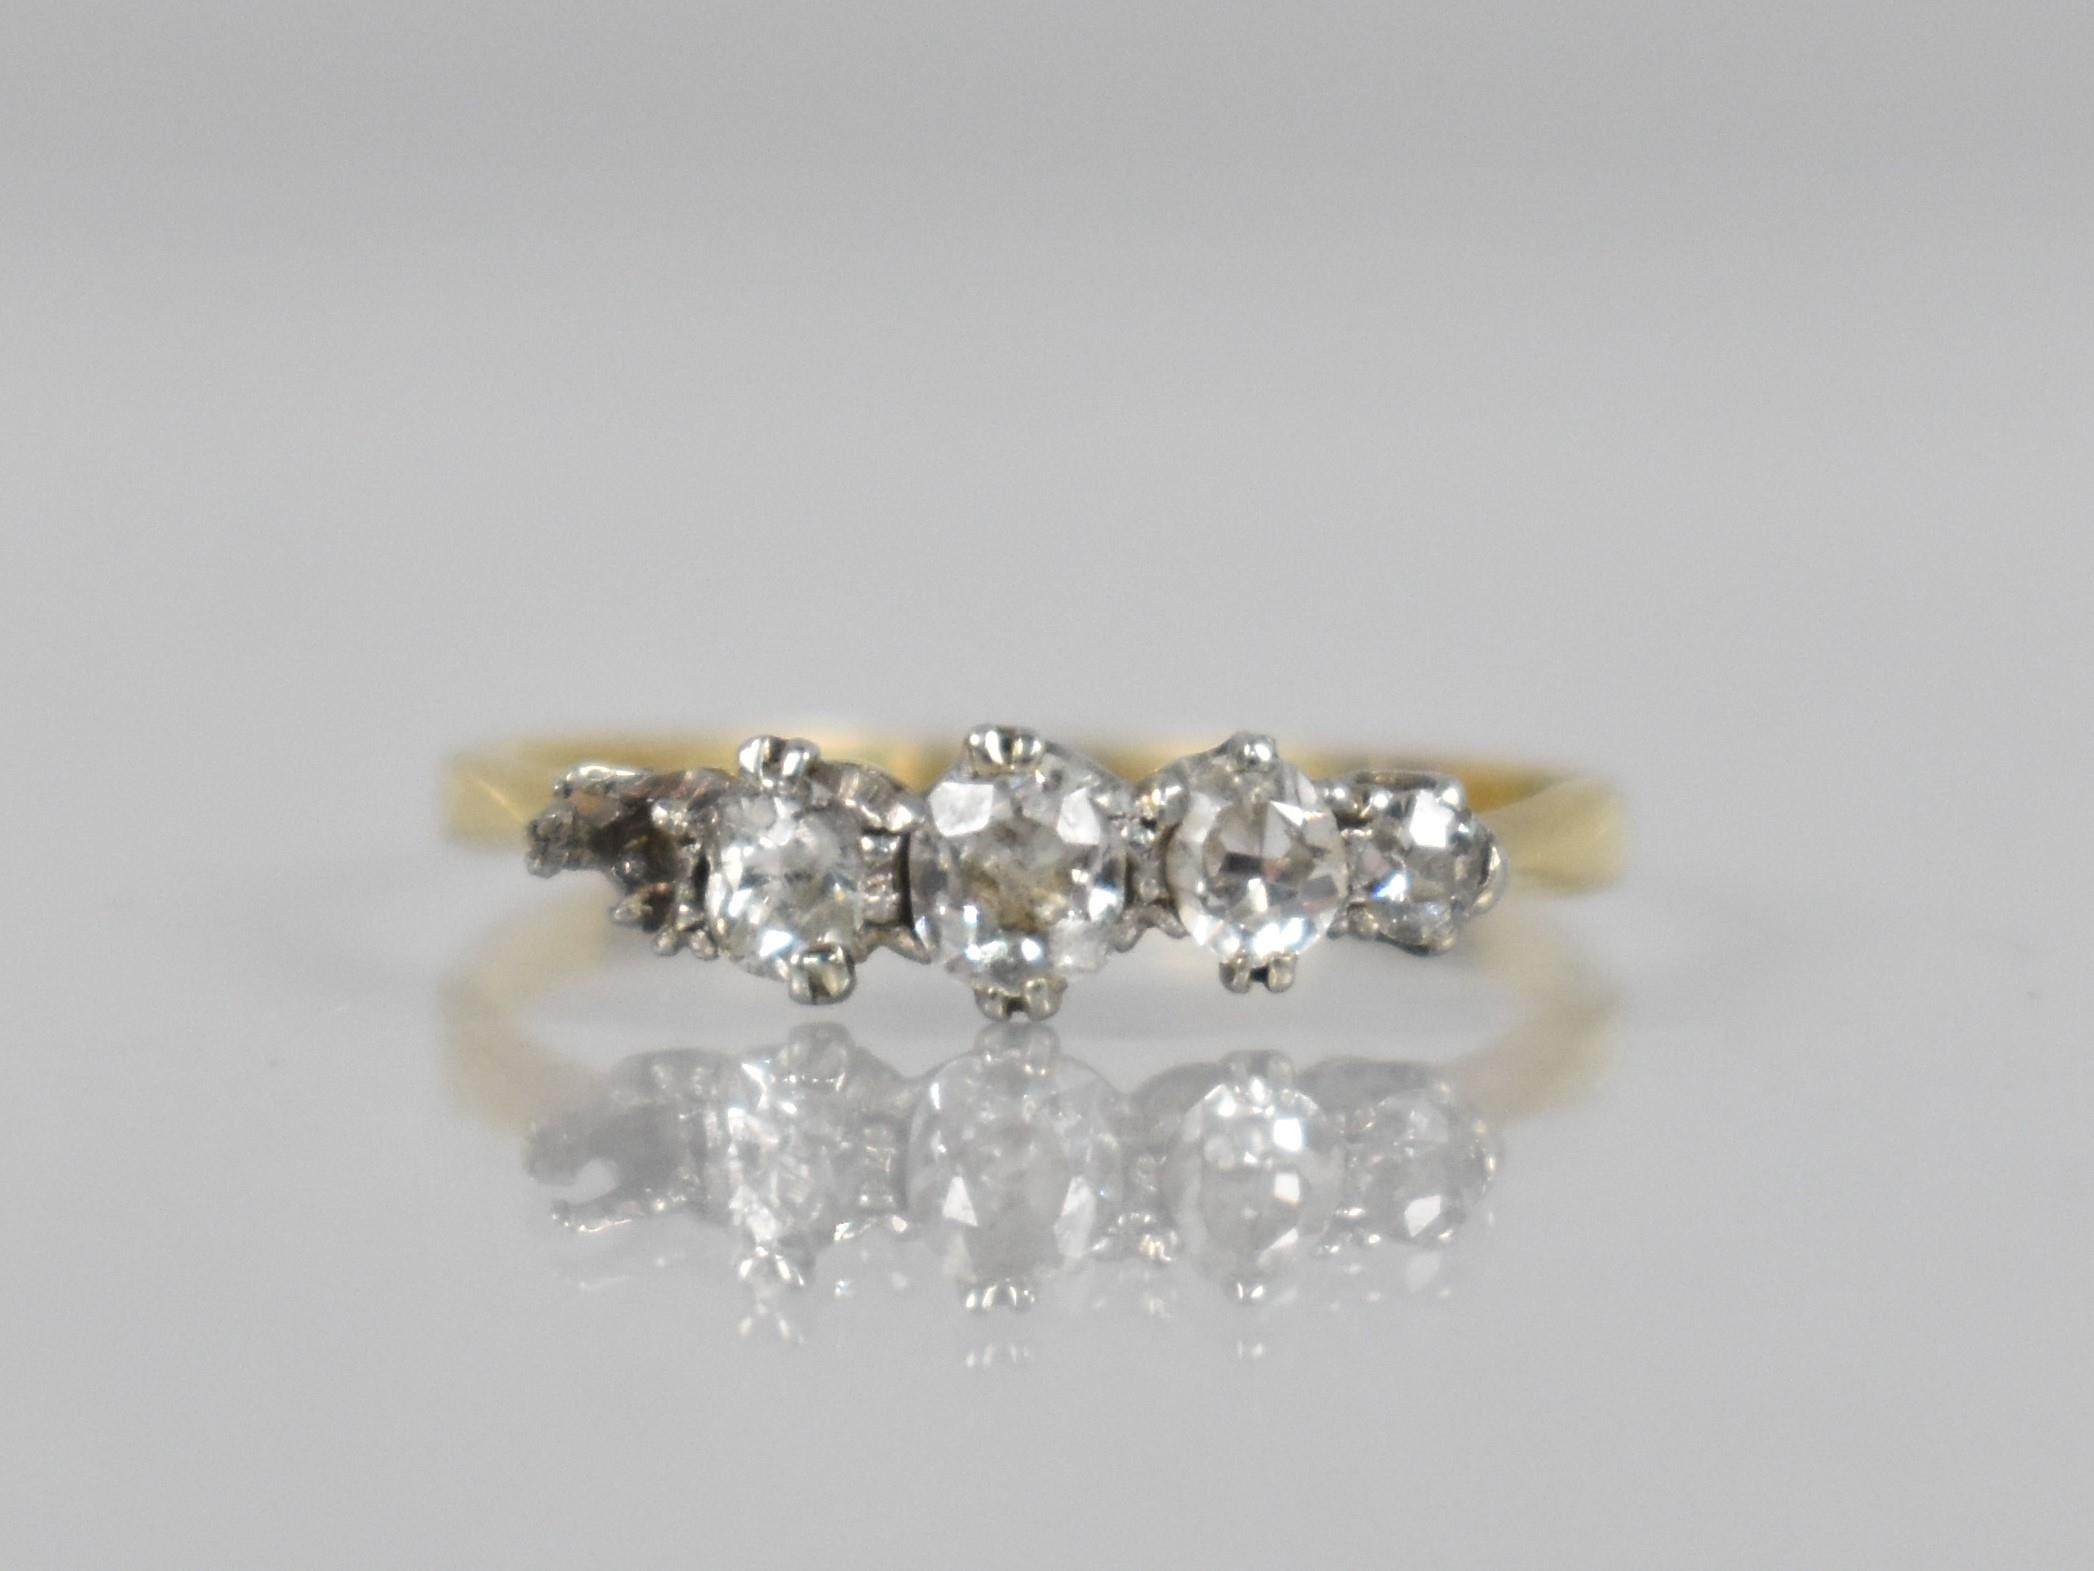 An Early 20th Century 18ct Gold and Diamond Five Stone Ring (Missing One Stone), Old Mixed/Mine